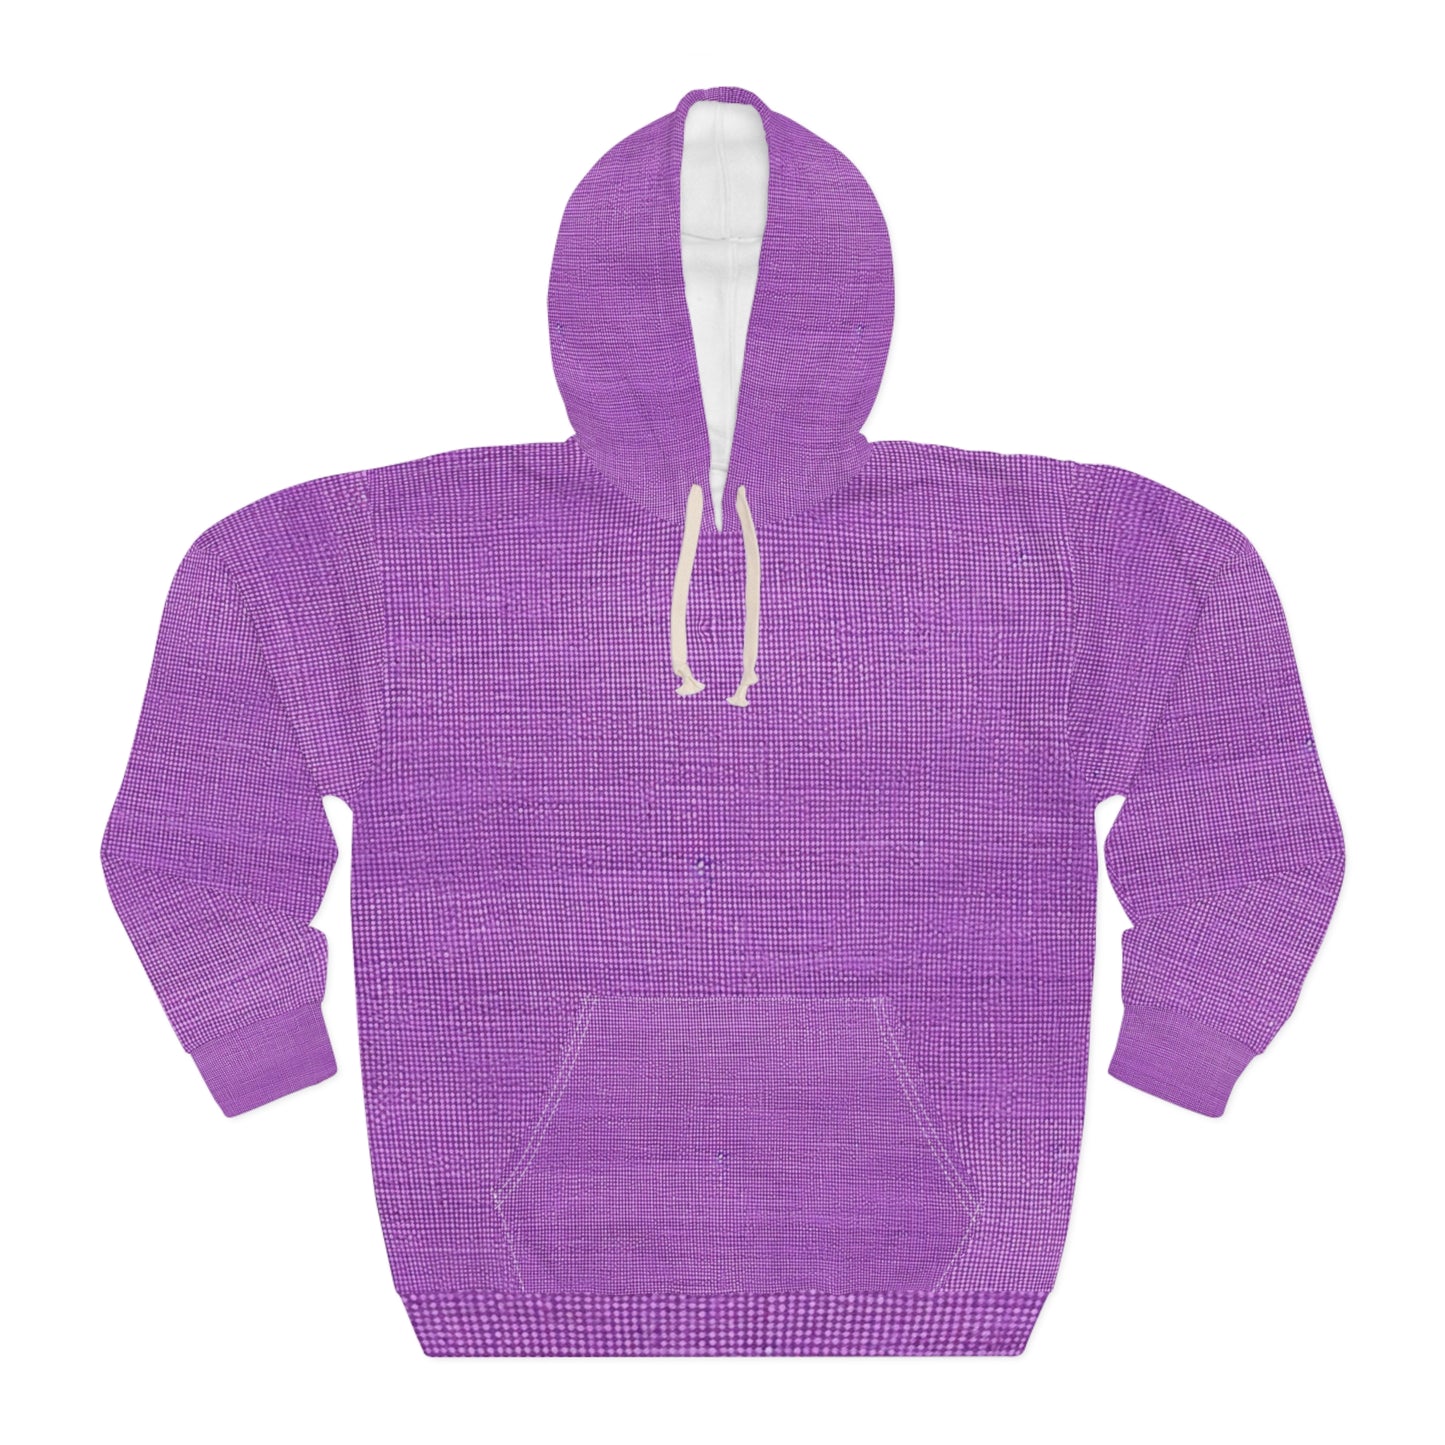 Hyper Iris Orchid Red: Denim-Inspired, Bold Style - Unisex Pullover Hoodie (AOP)